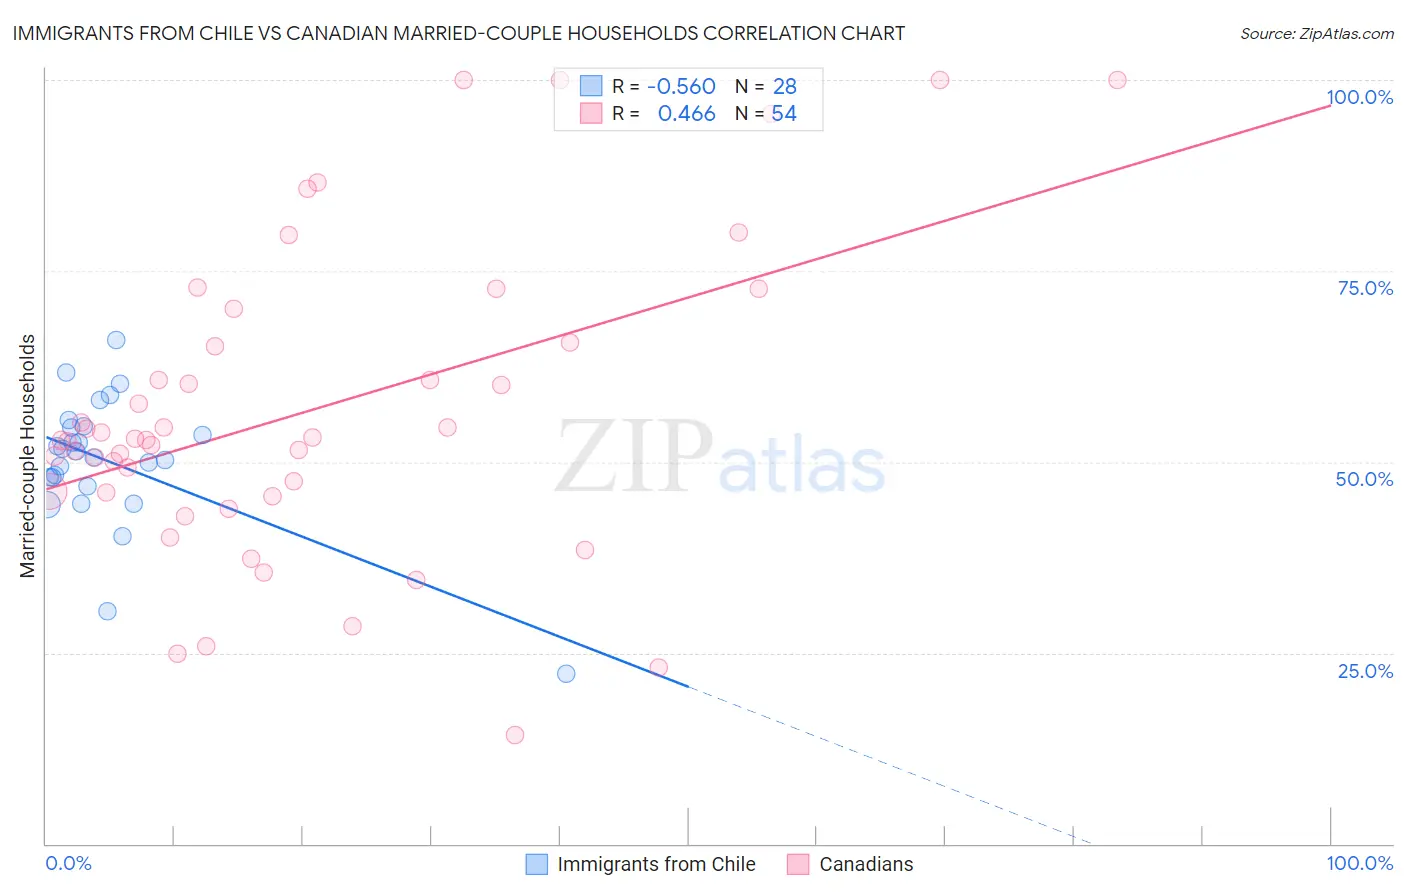 Immigrants from Chile vs Canadian Married-couple Households